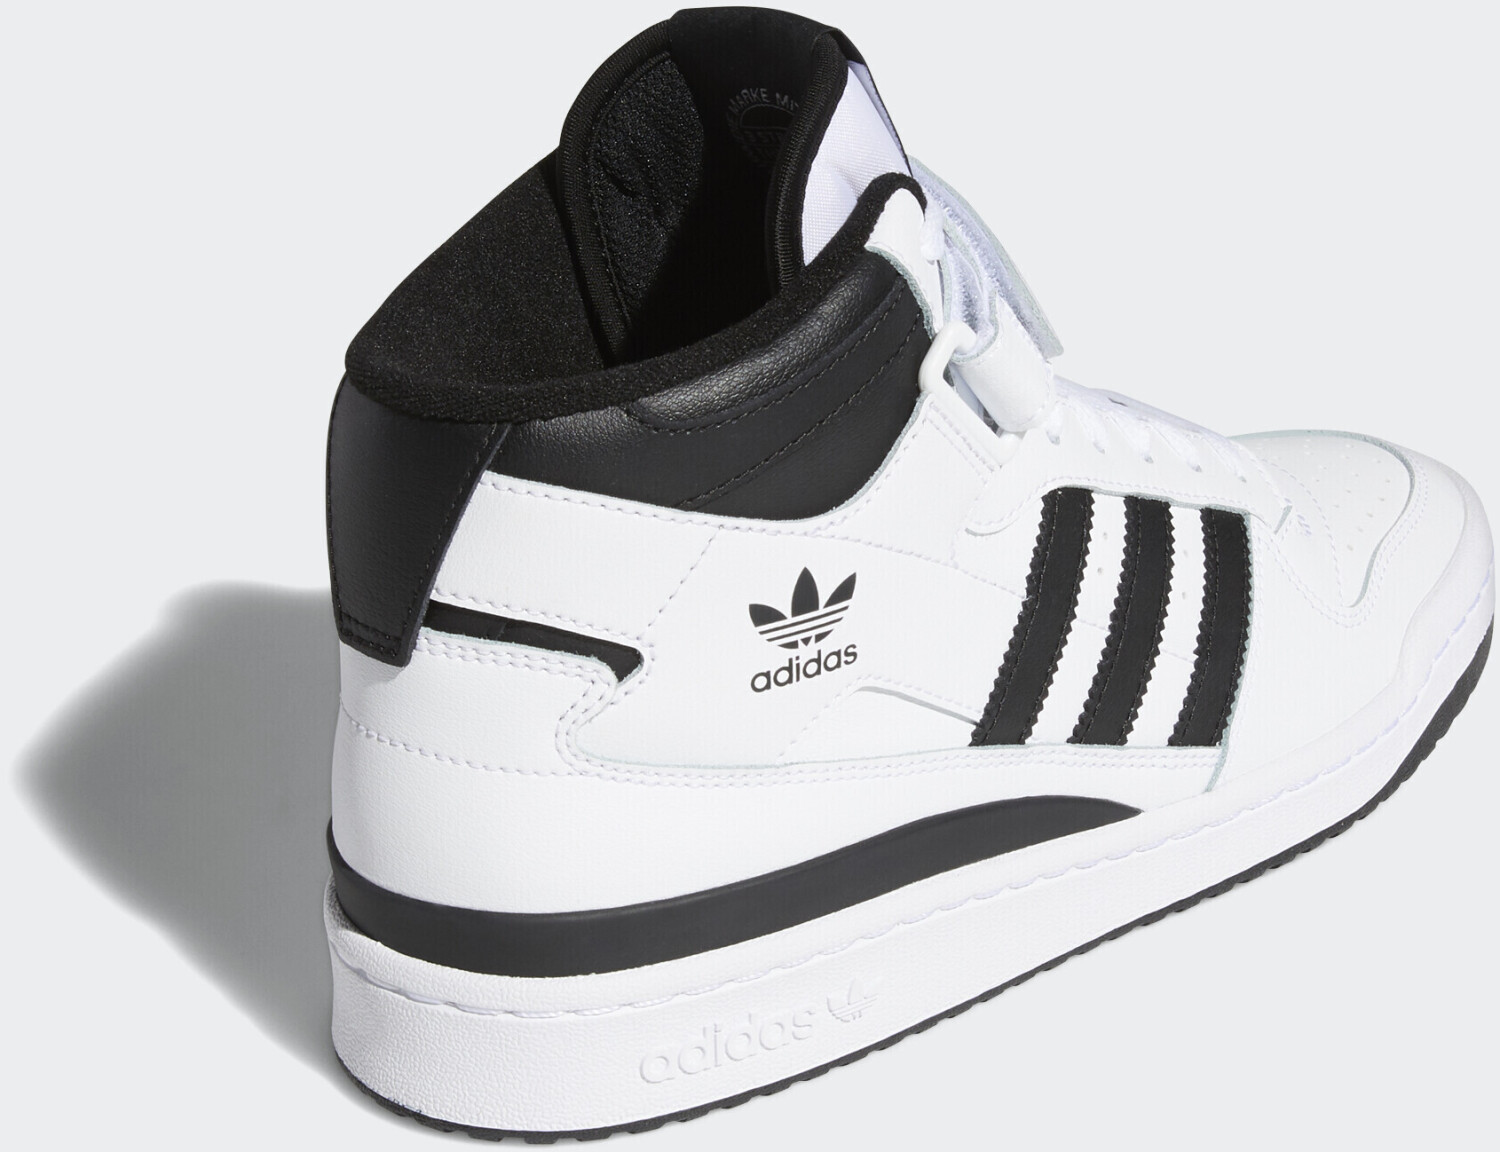 Buy Adidas Forum Mid cloud white/core black/cloud white from £45.00 ...